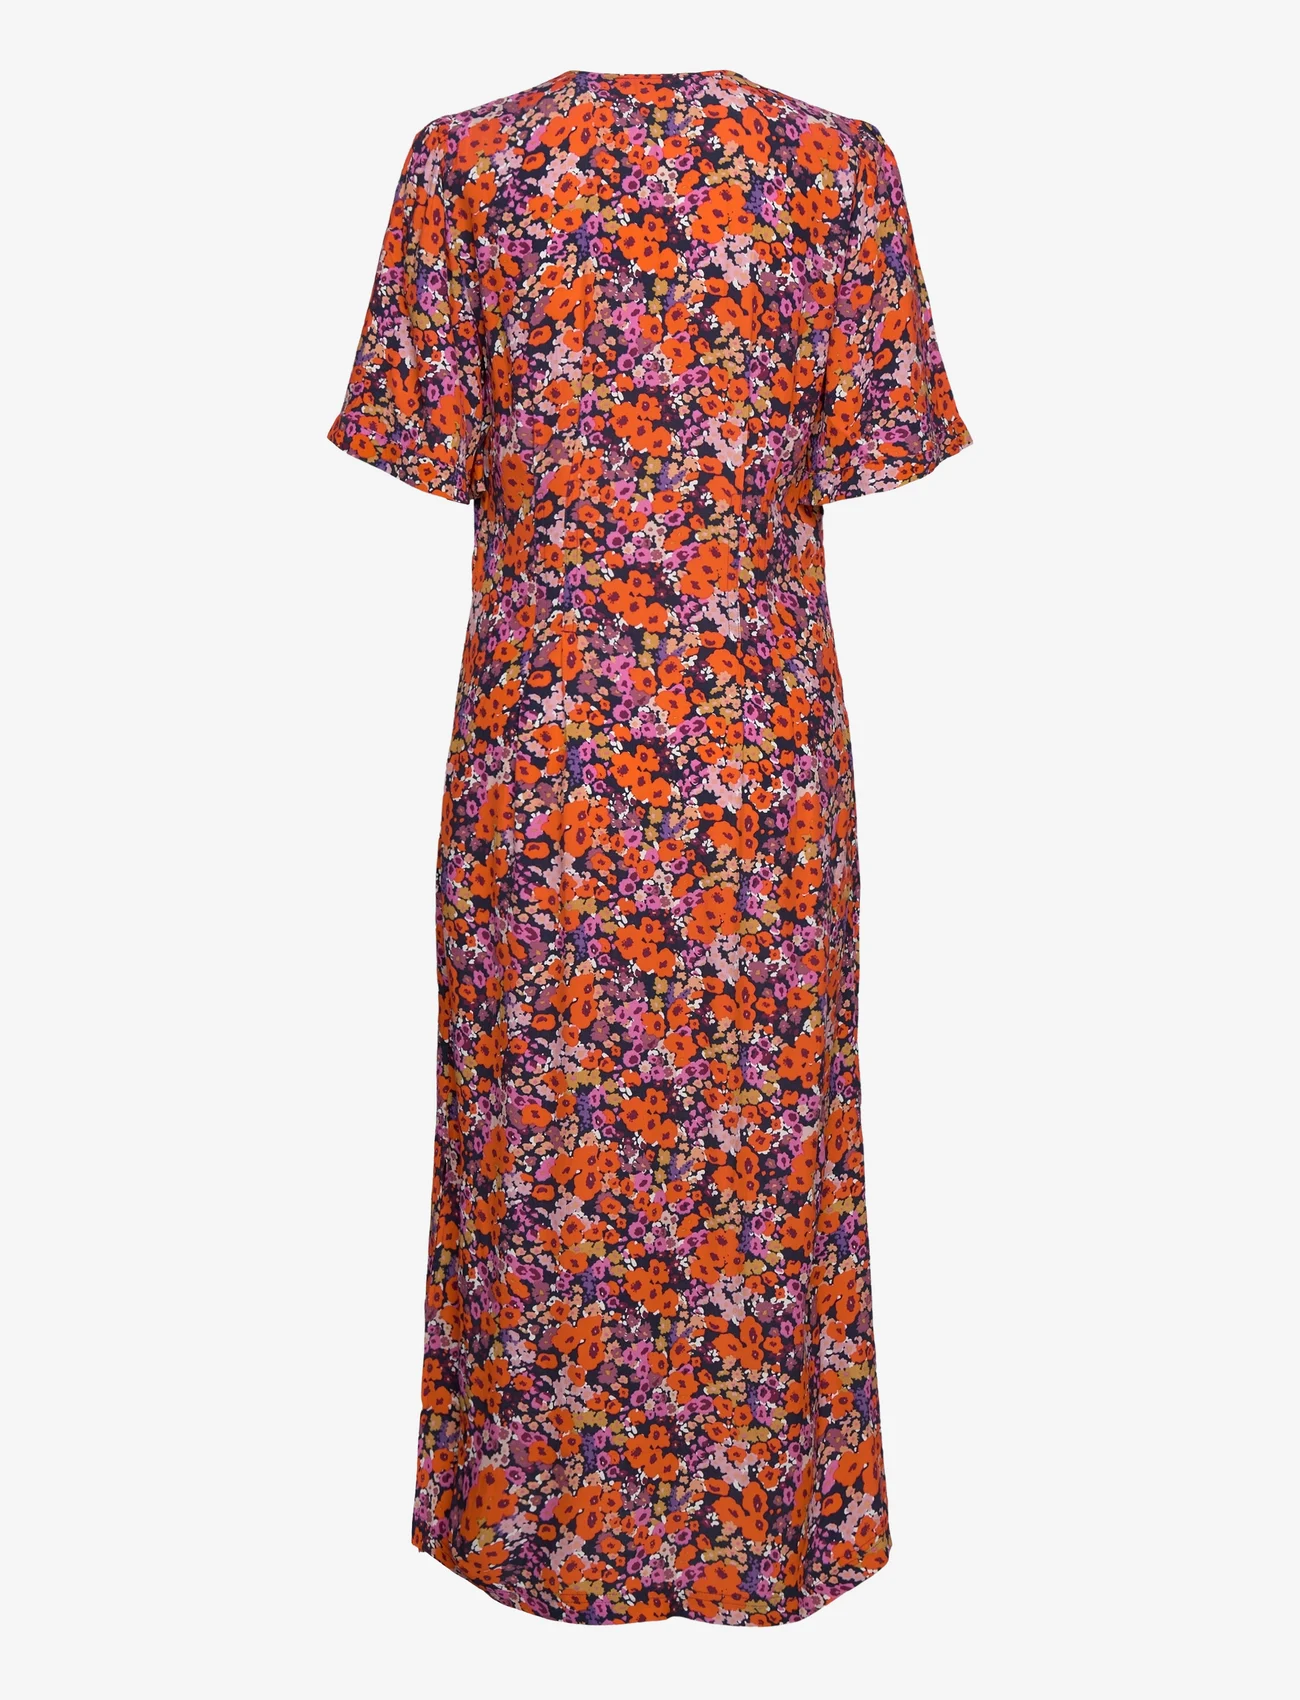 Esprit Casual - Short-sleeved midi dress with floral pattern - suvekleidid - navy 5 - 1